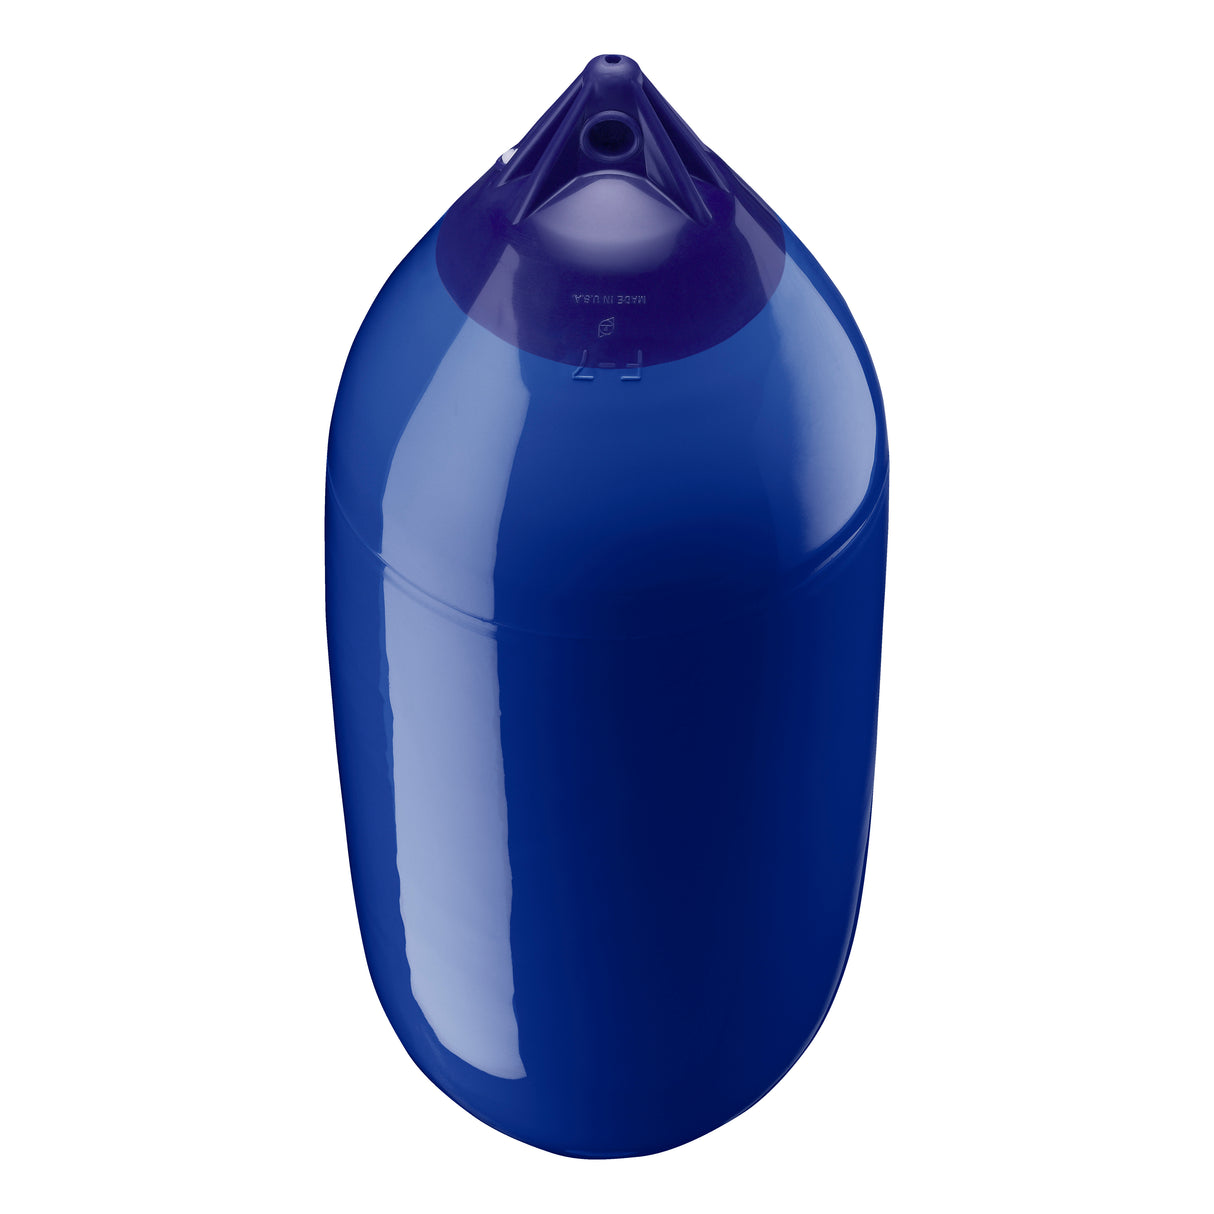 Cobalt Blue boat fender with Navy-Top, Polyform F-7 angled shot